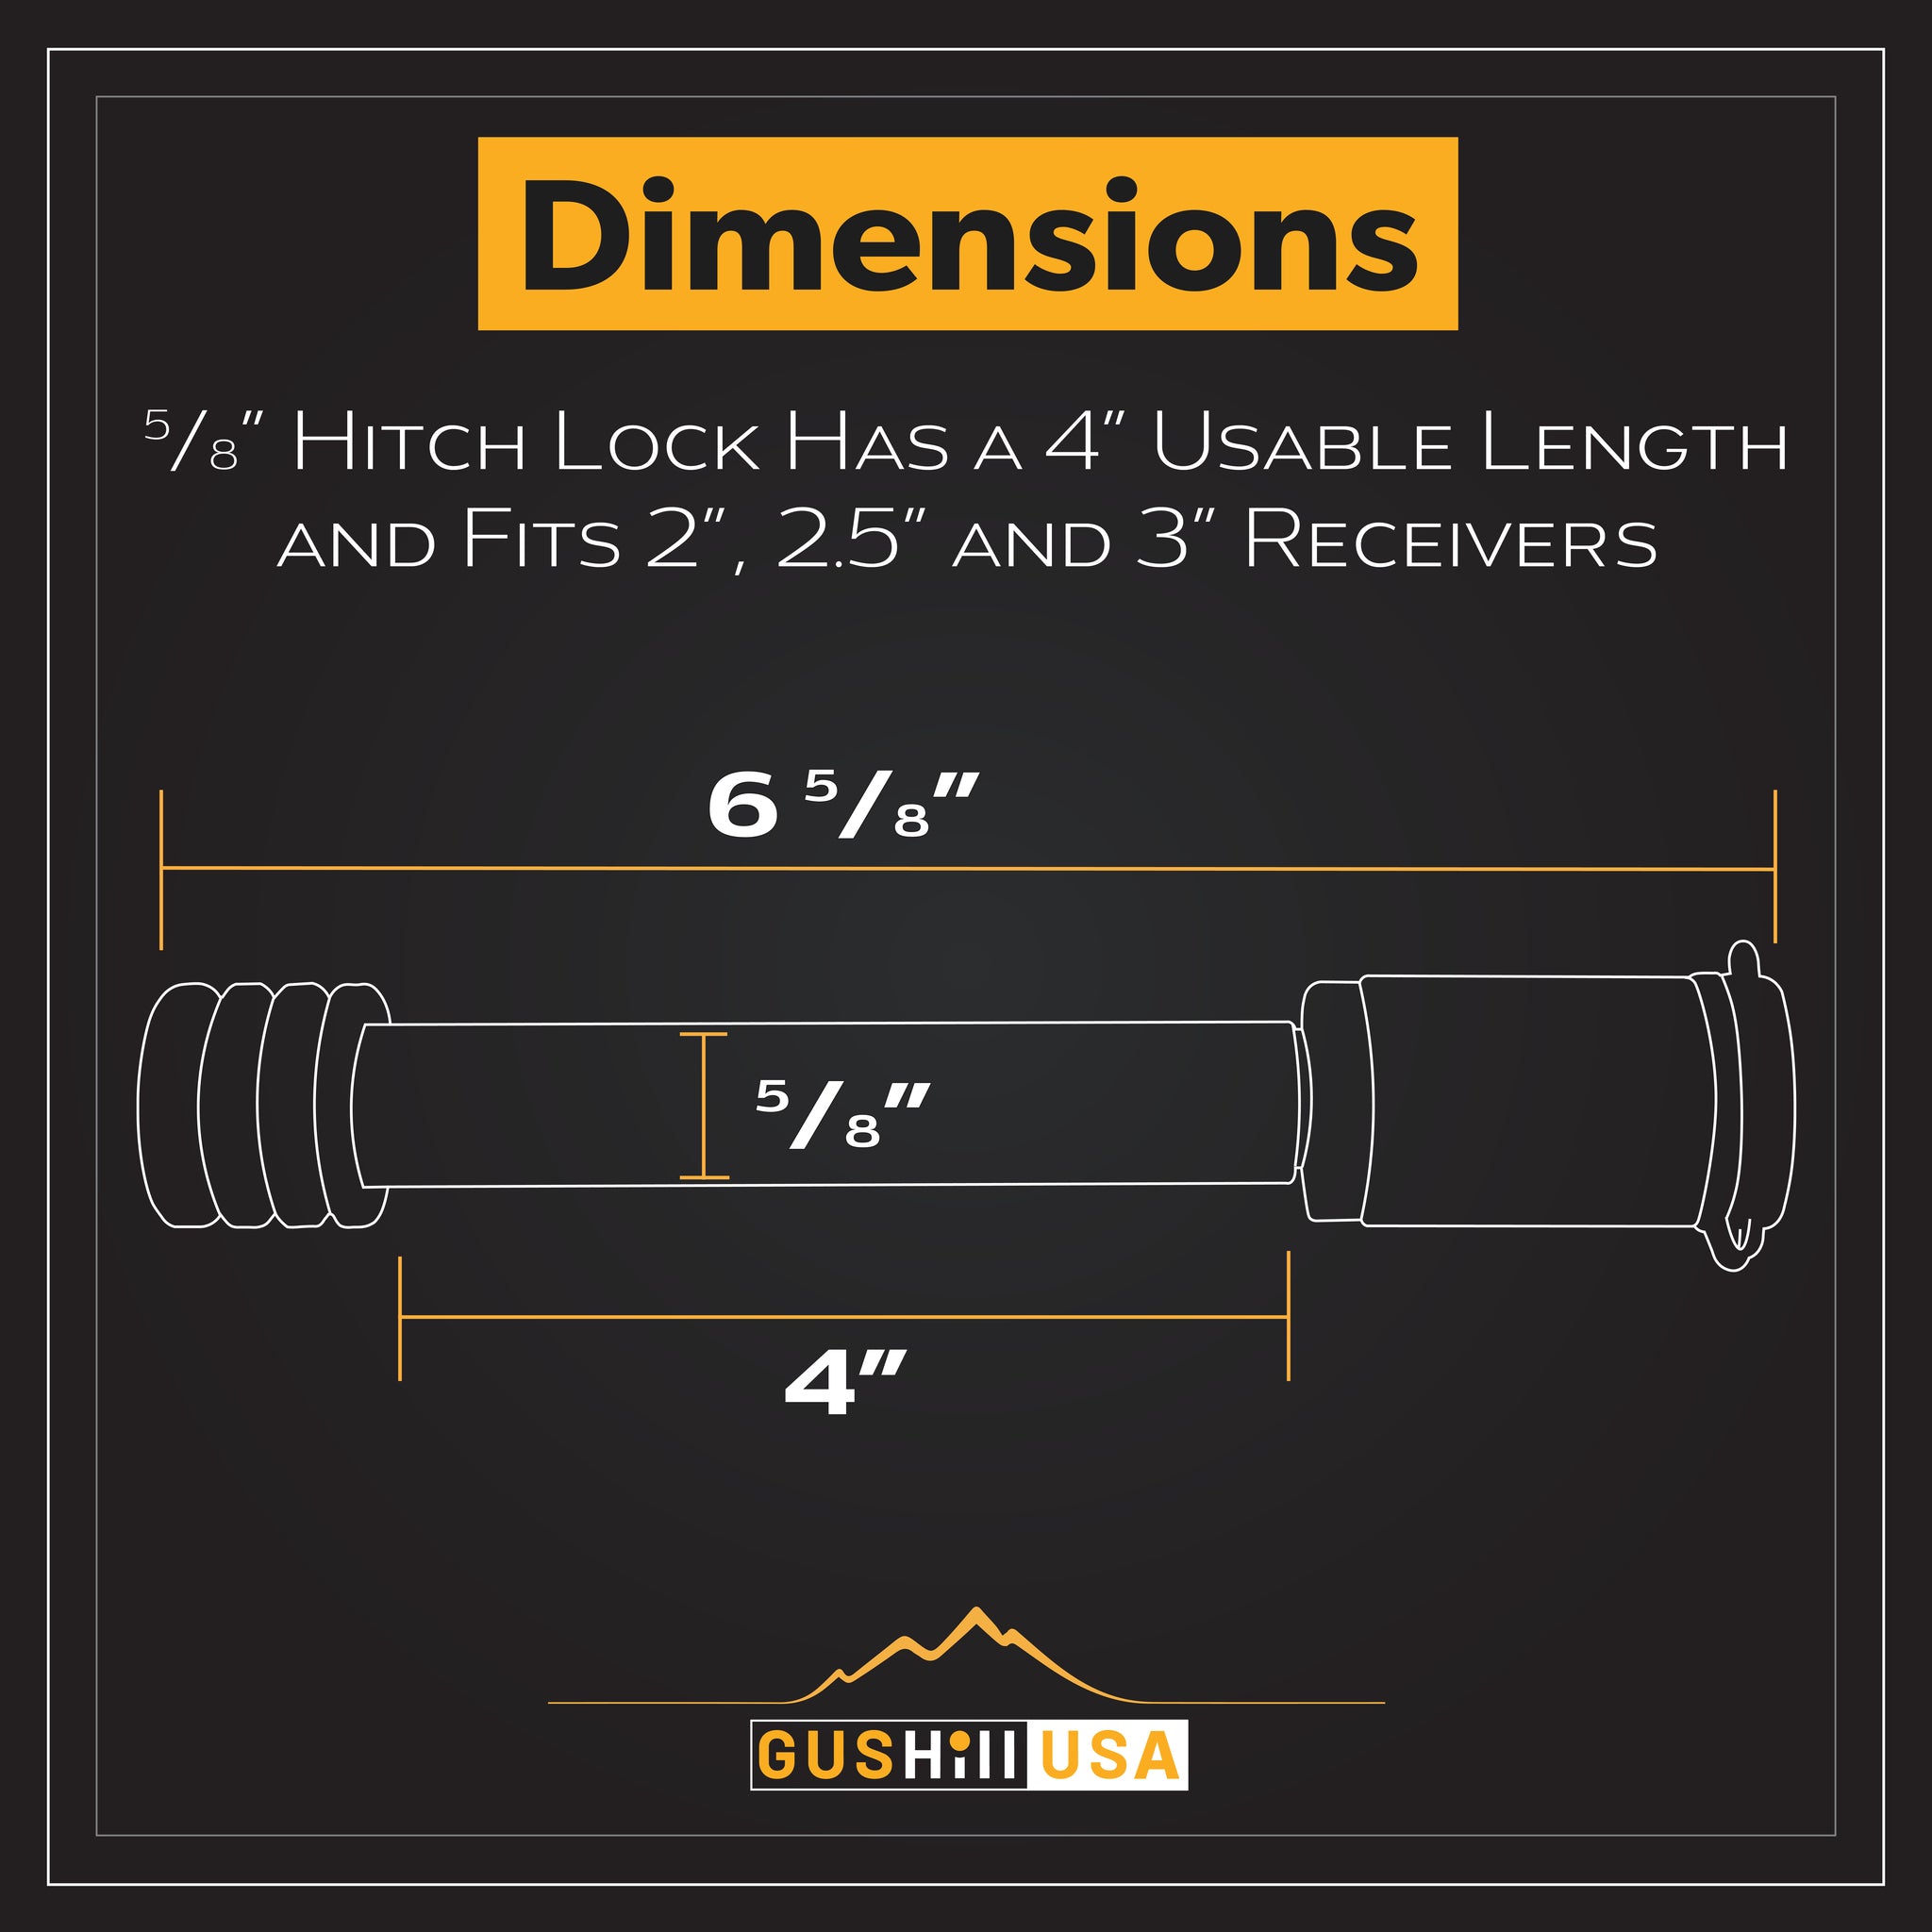 Hitch Lock with 4" effective length